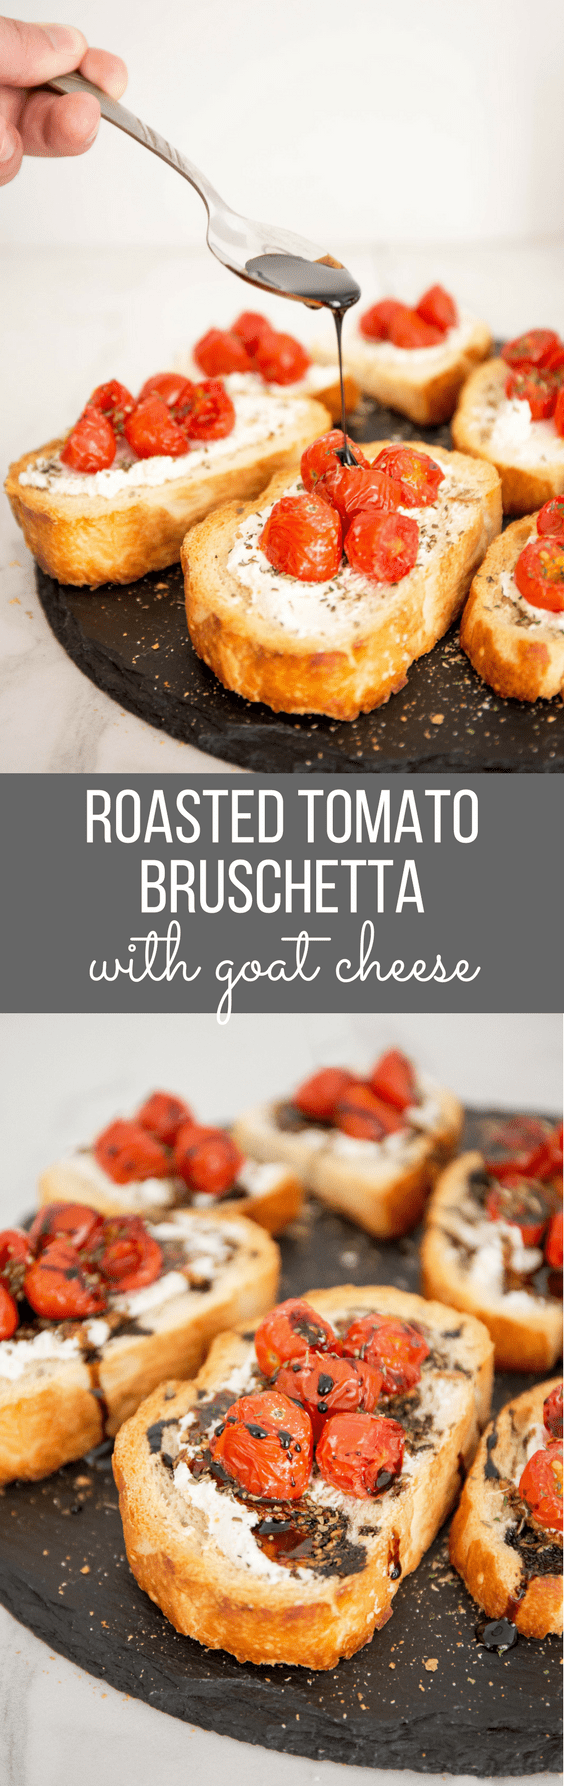 Roasted Tomato Bruschetta - Up your bruschetta game with roasted tomatoes, goat cheese and sweet balsamic reduction. You'll never go back after trying this! | wanderzestblog.com